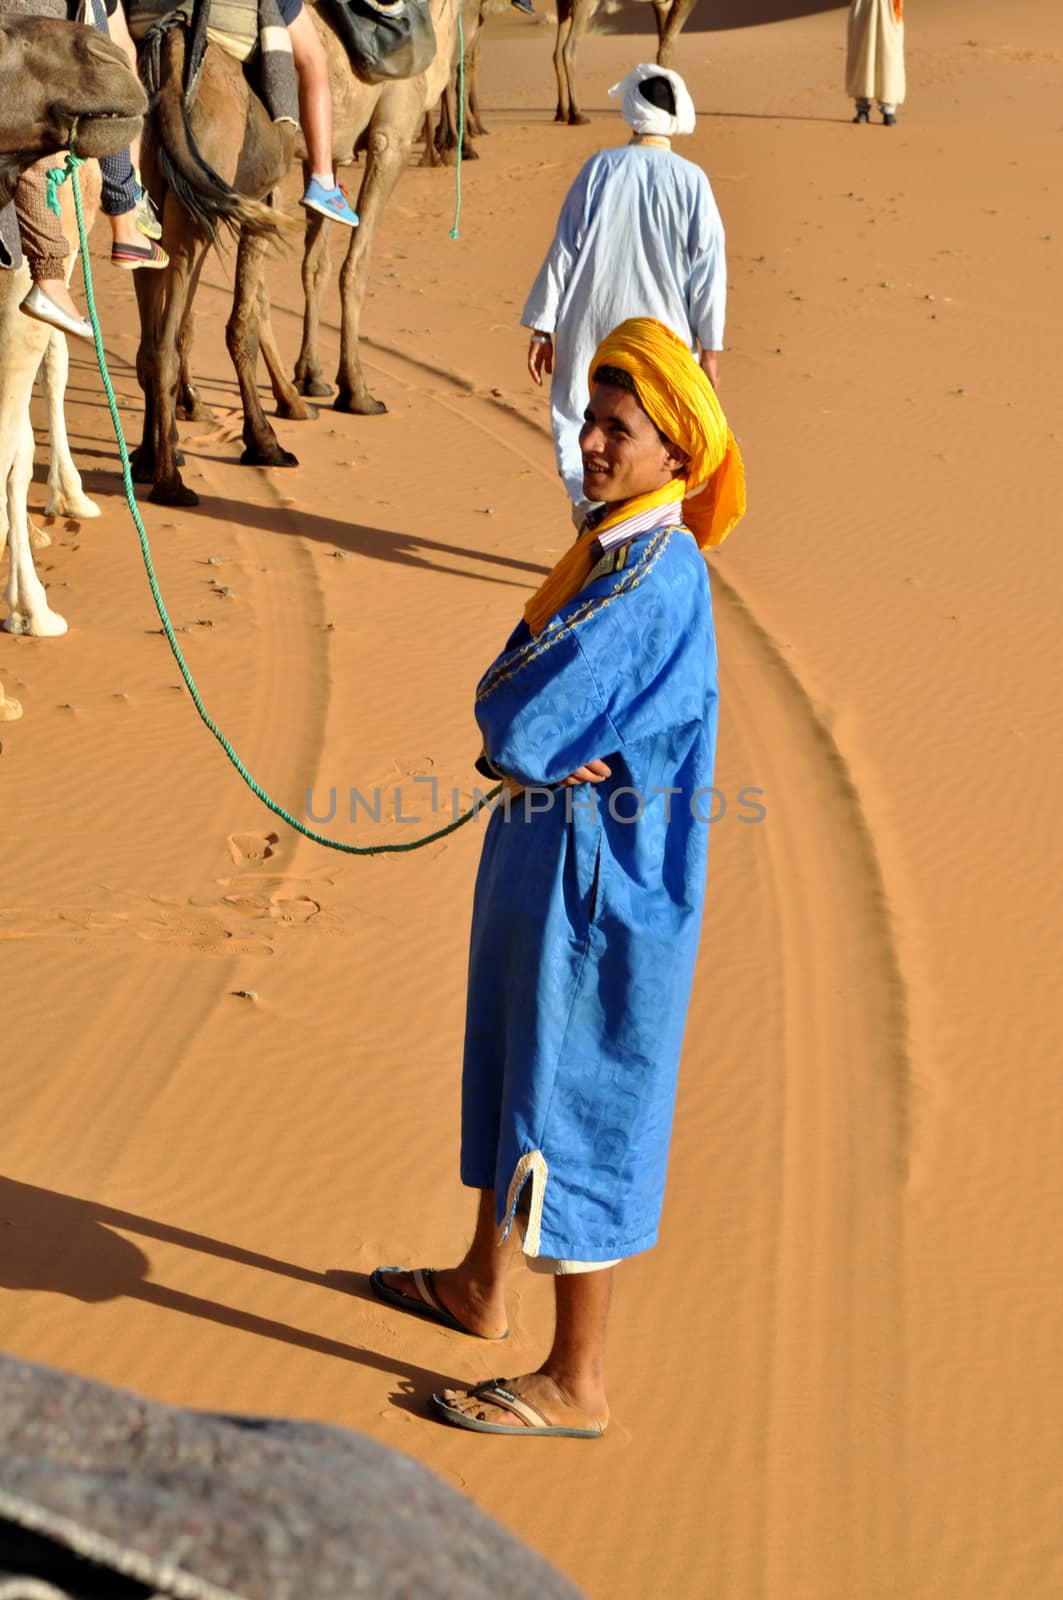 MERZOUGA DESERT - OCTOBER 01: Man in traditional Berber wear, wa by anderm